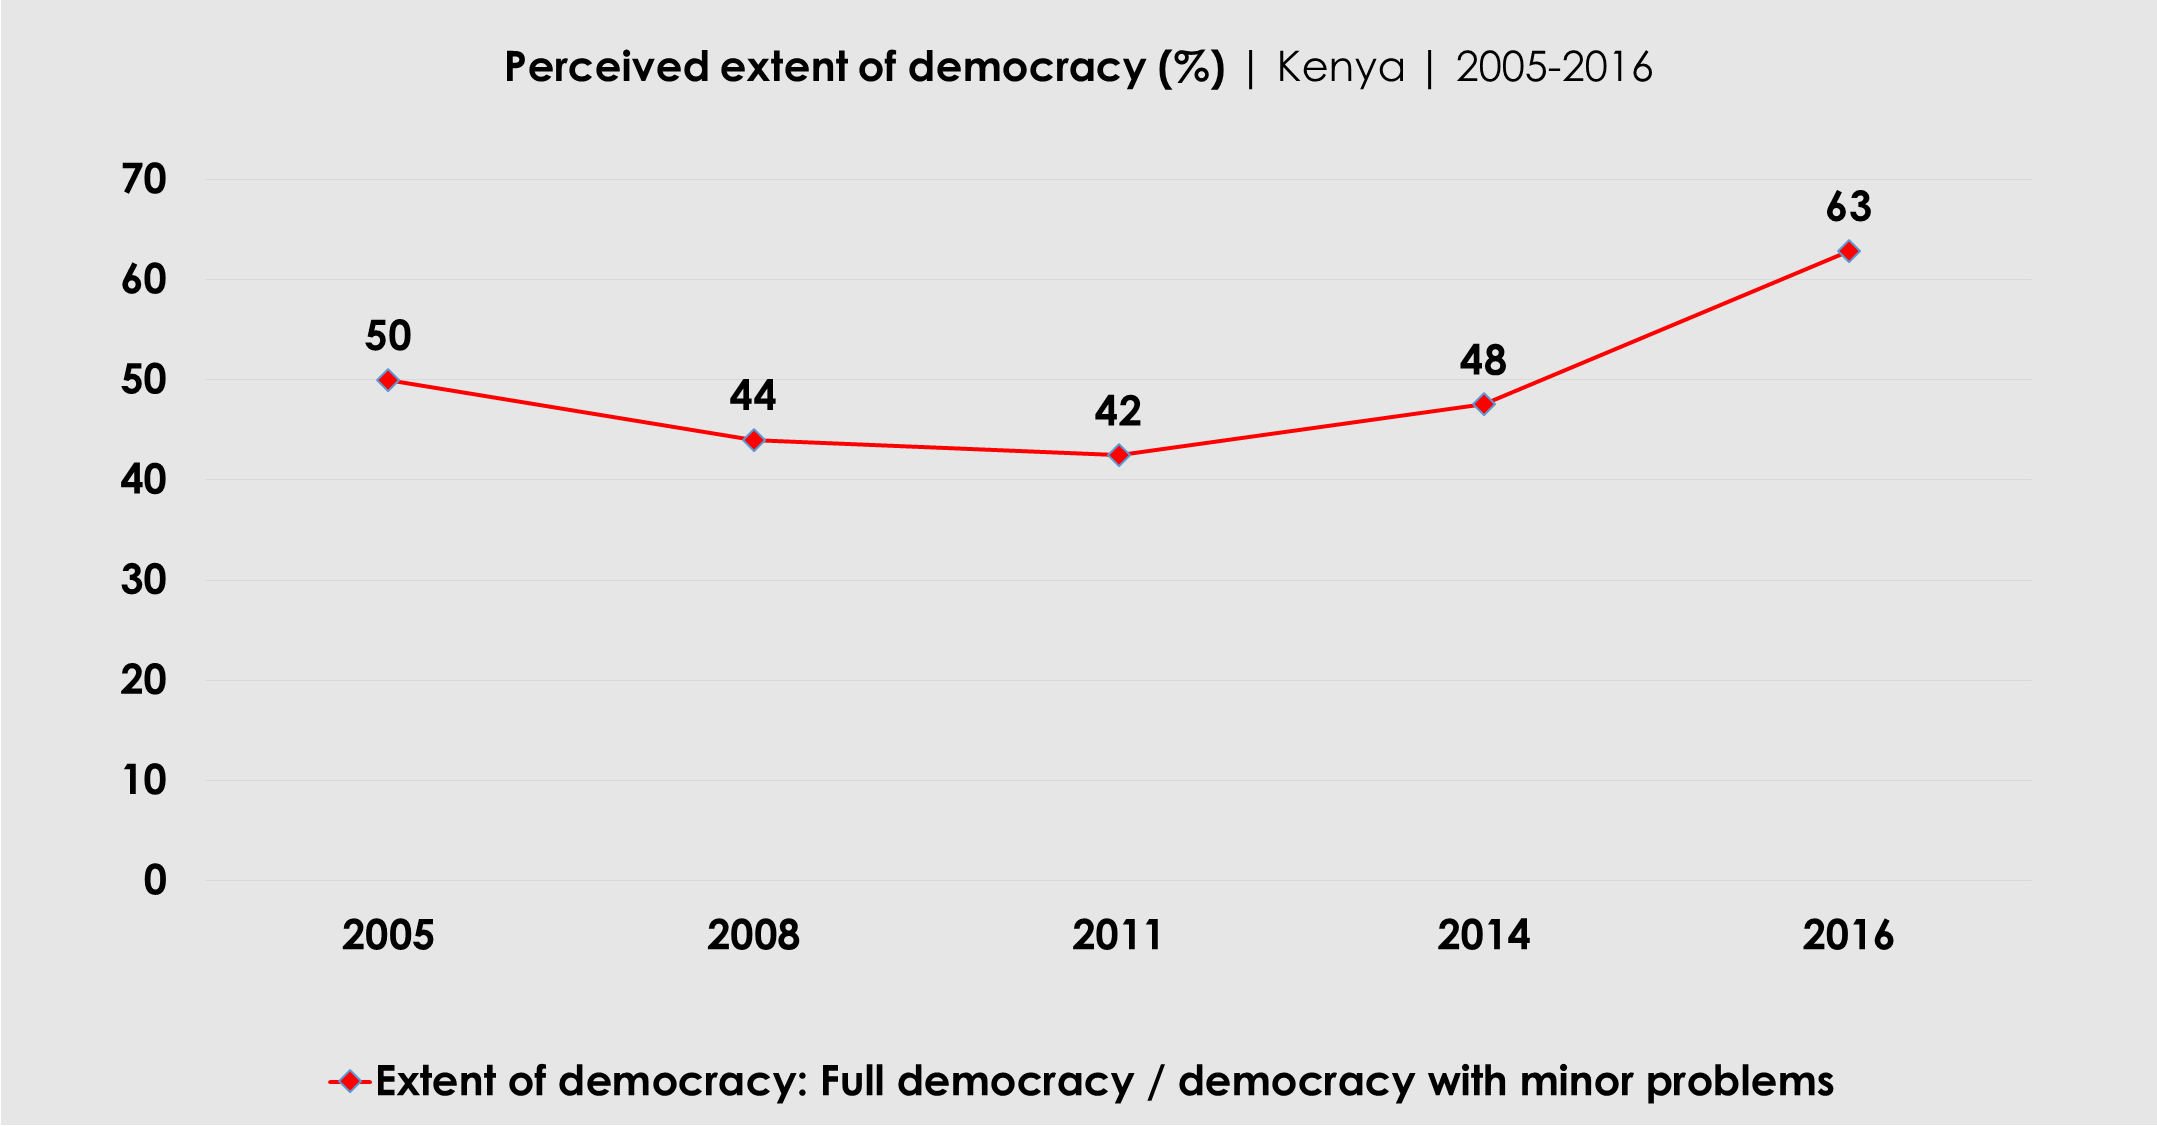 Graph: Perceived extent of democracy in Kenya (2005-2016)